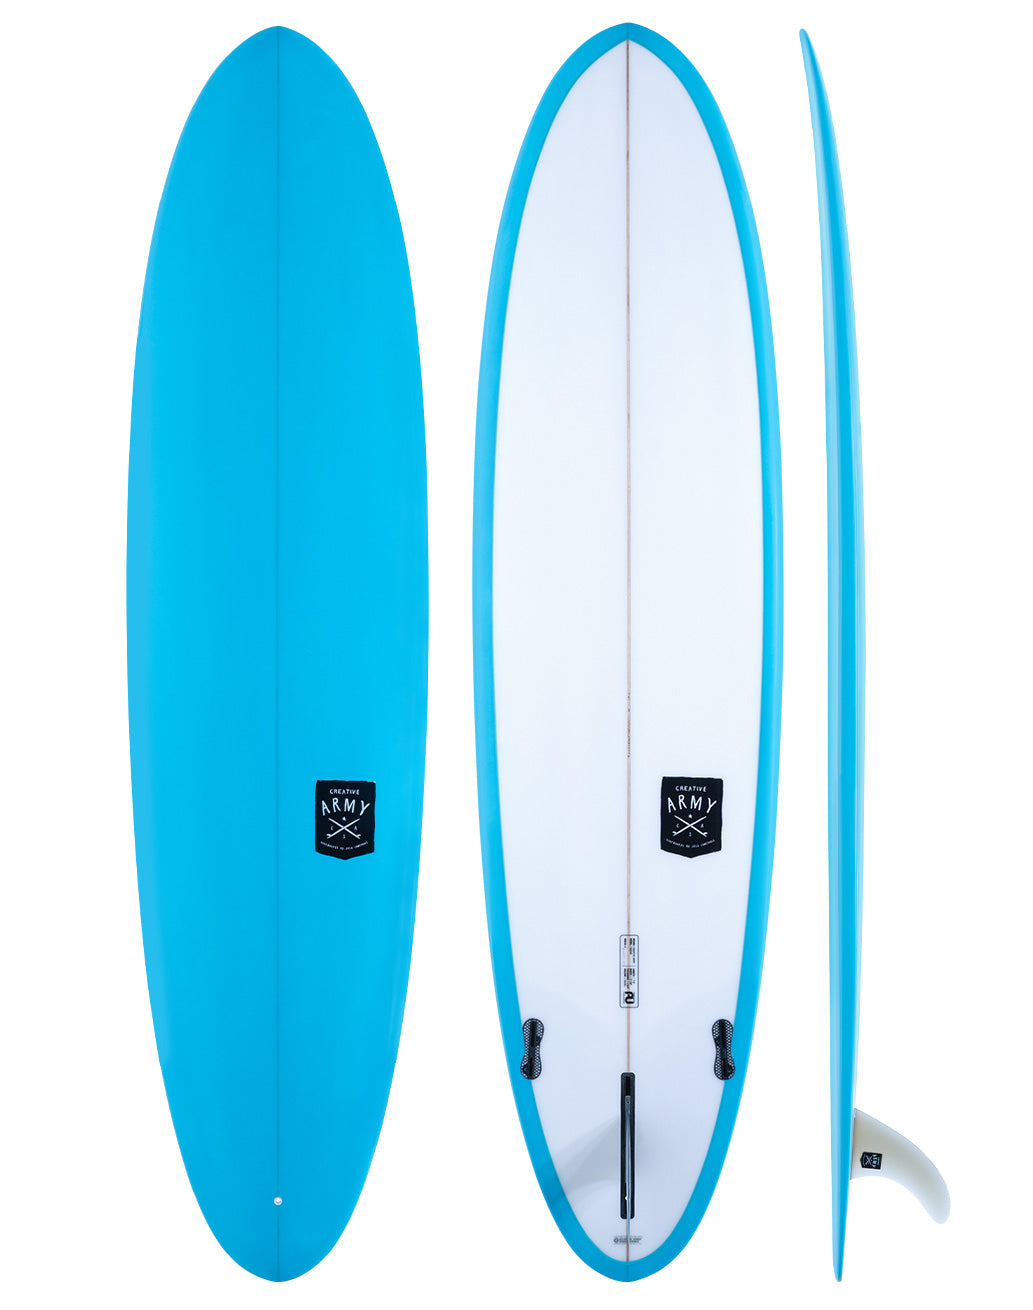 Creative Army Surfboards - Huevo blue and white mid length surfboard